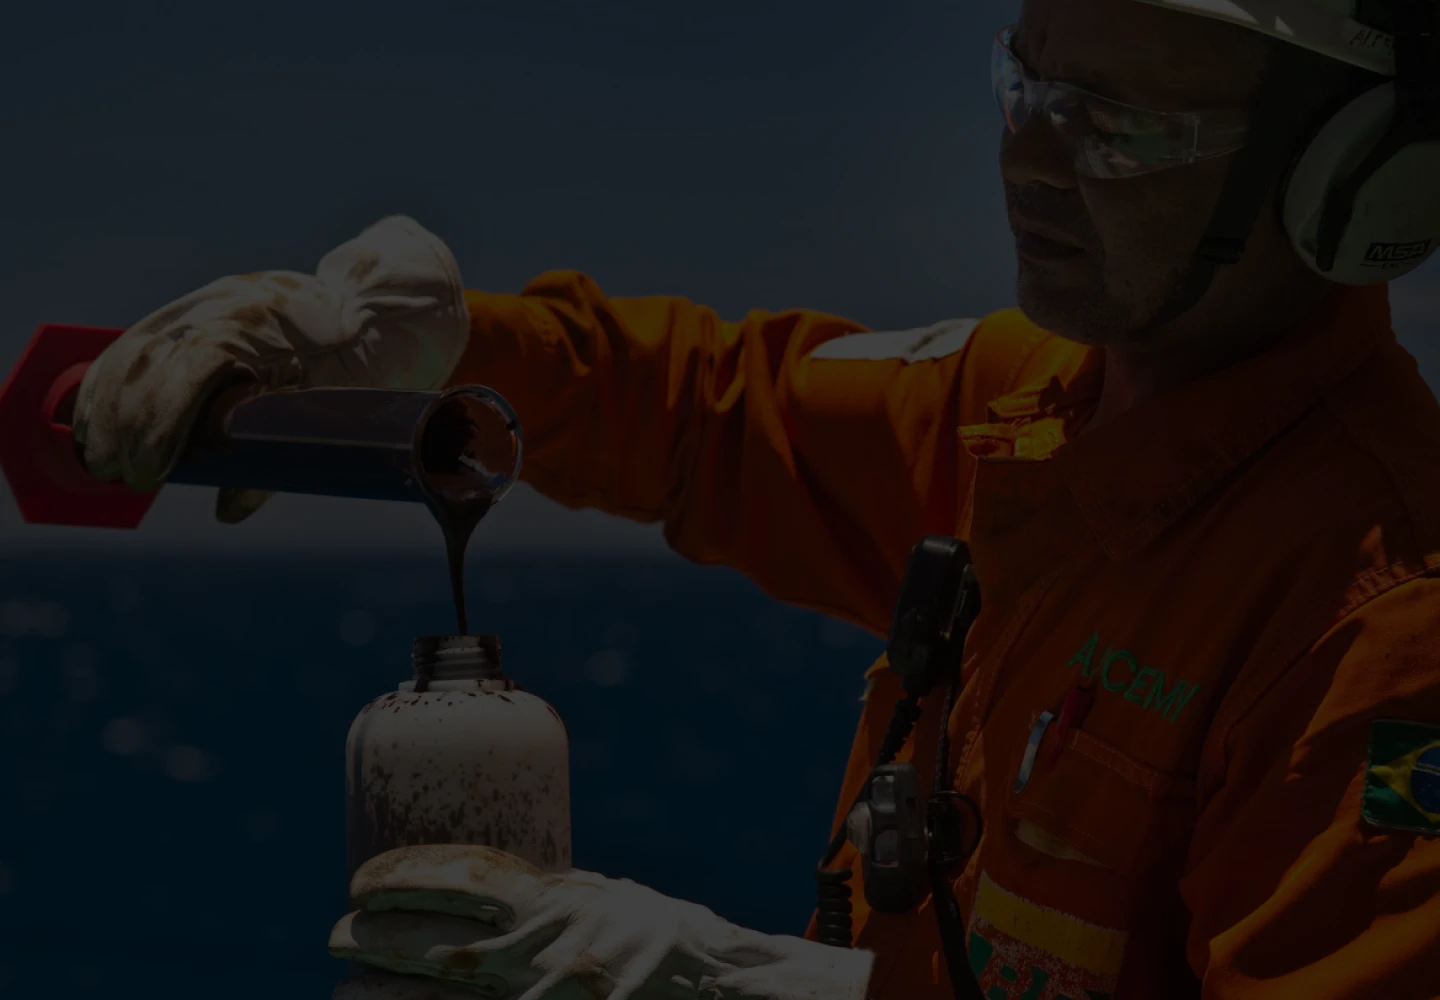 Photo of a Petrobras employee pouring oil in a metal bottle.